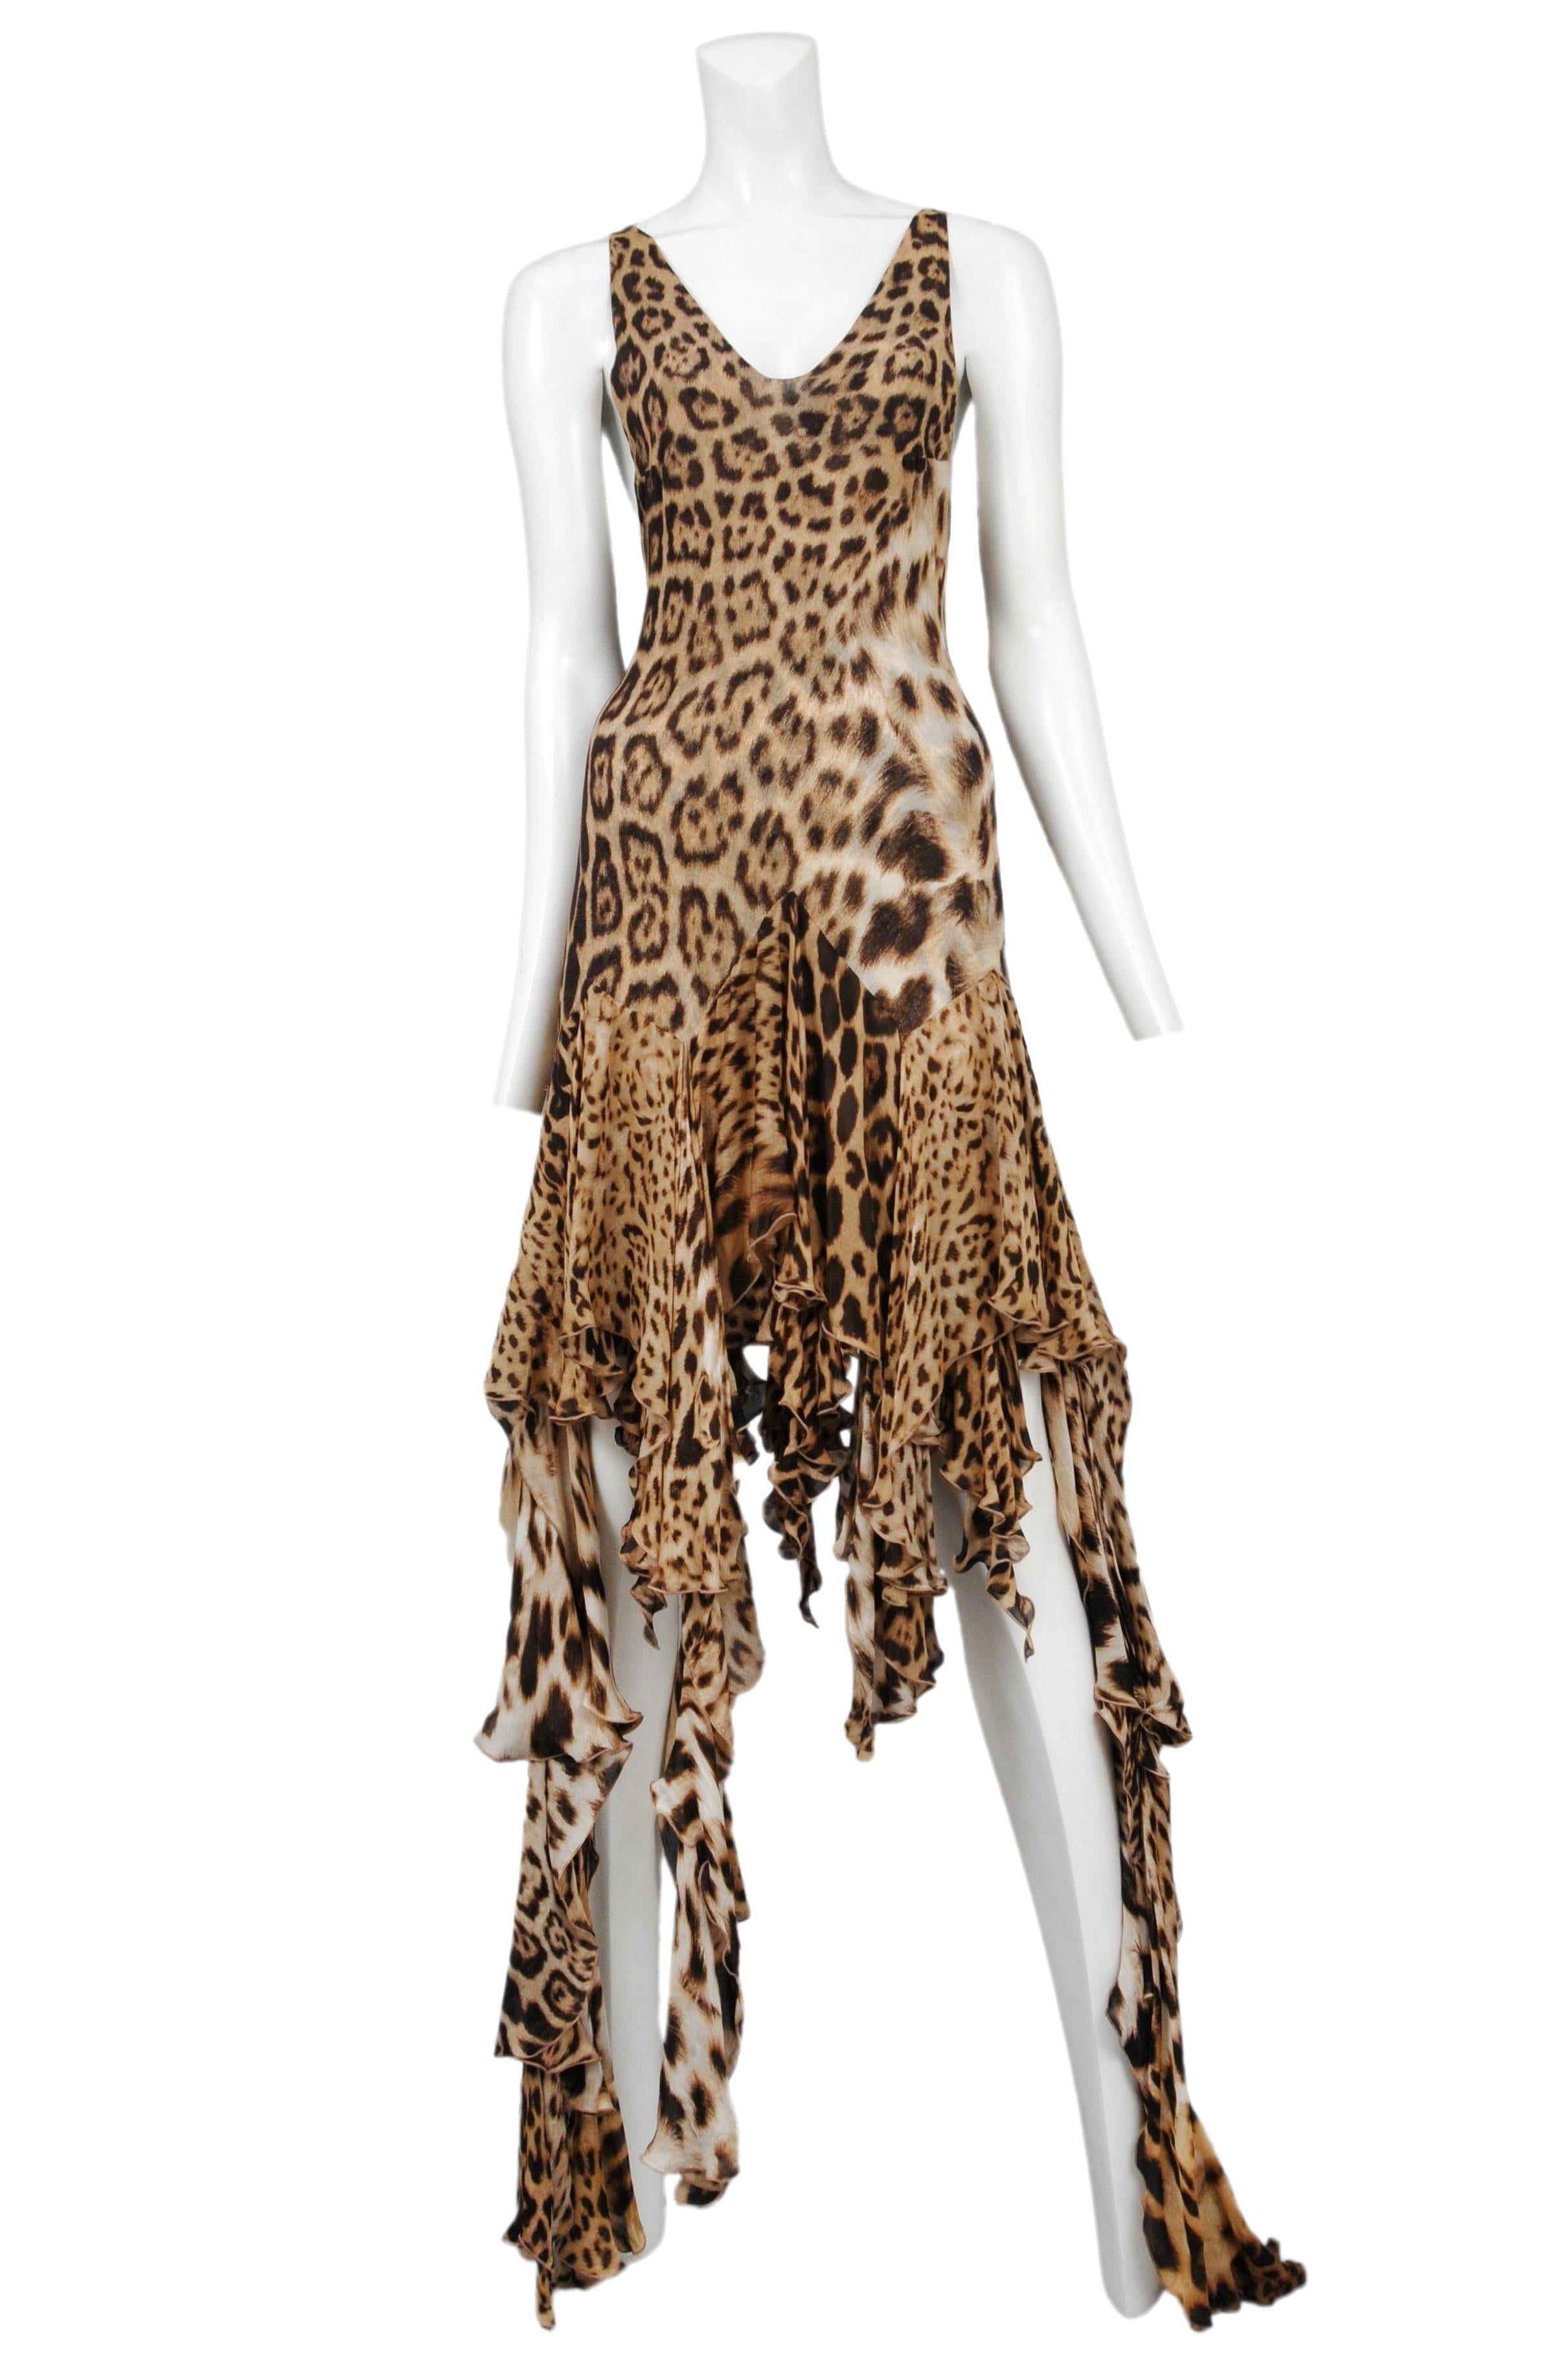 Vintage Roberto Cavalli silk sleeveless gown featuring an allover mixed leopard print and ruffled panels that drape unevenly from the hem.
Please inquire for additional images.